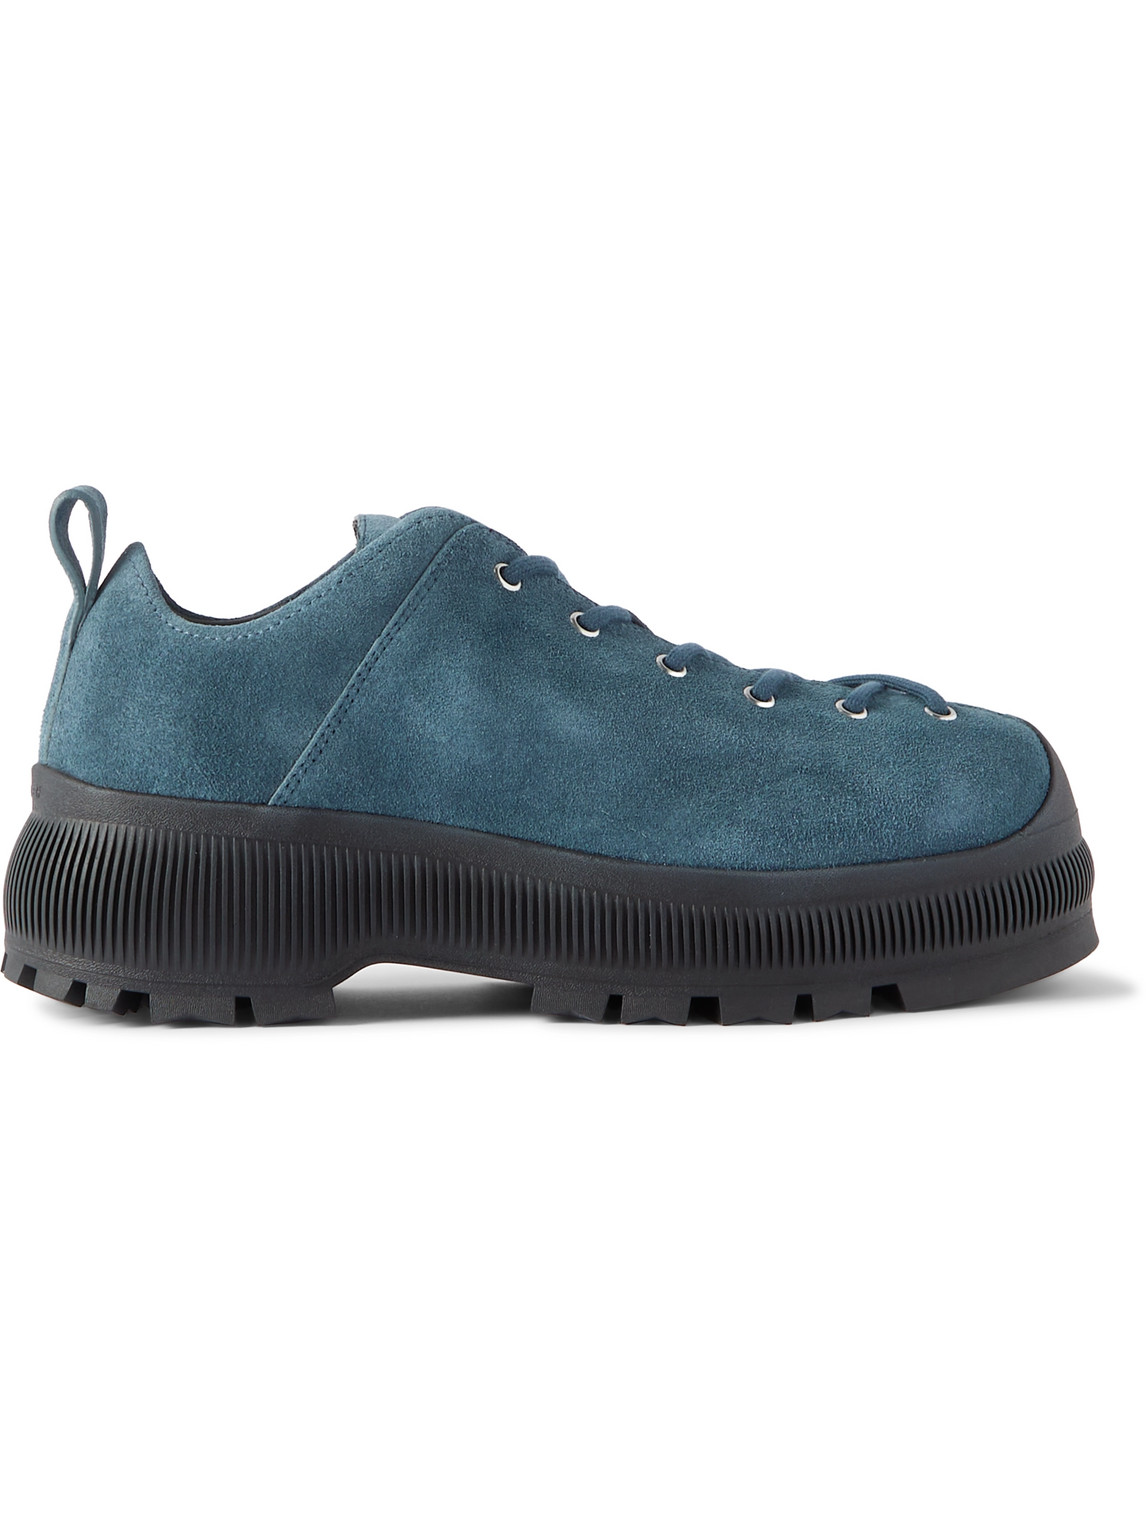 JIL SANDER EXAGGERATED-SOLE SUEDE SNEAKERS